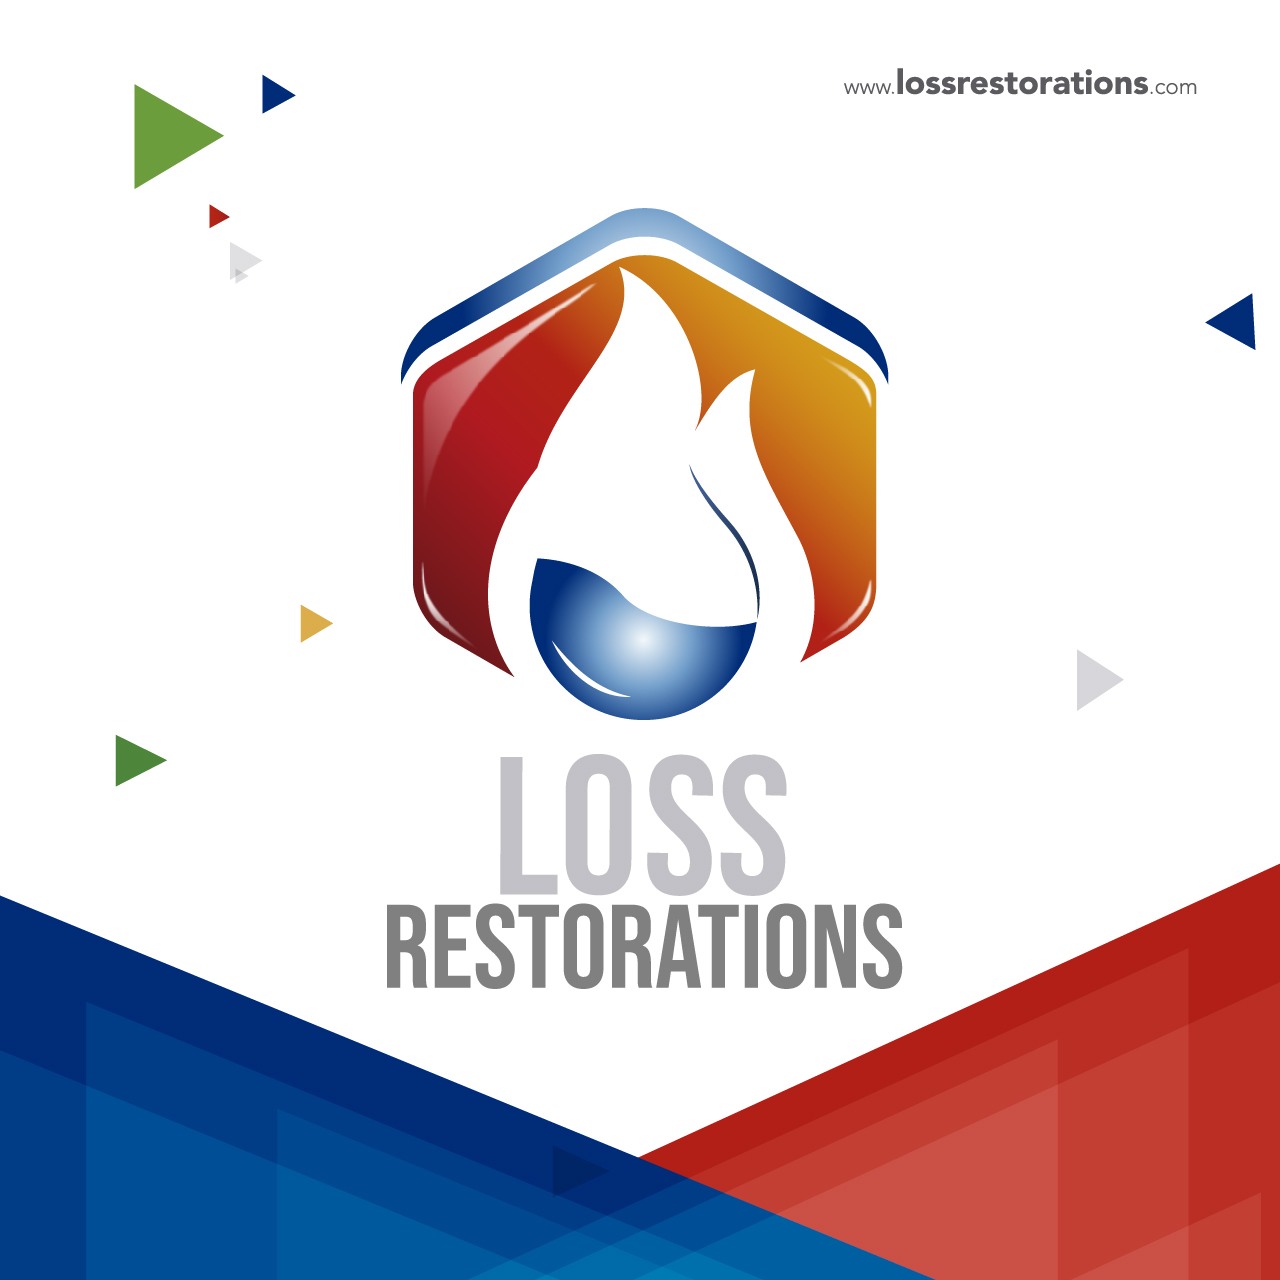 Avoid headache and go for Loss Restorations